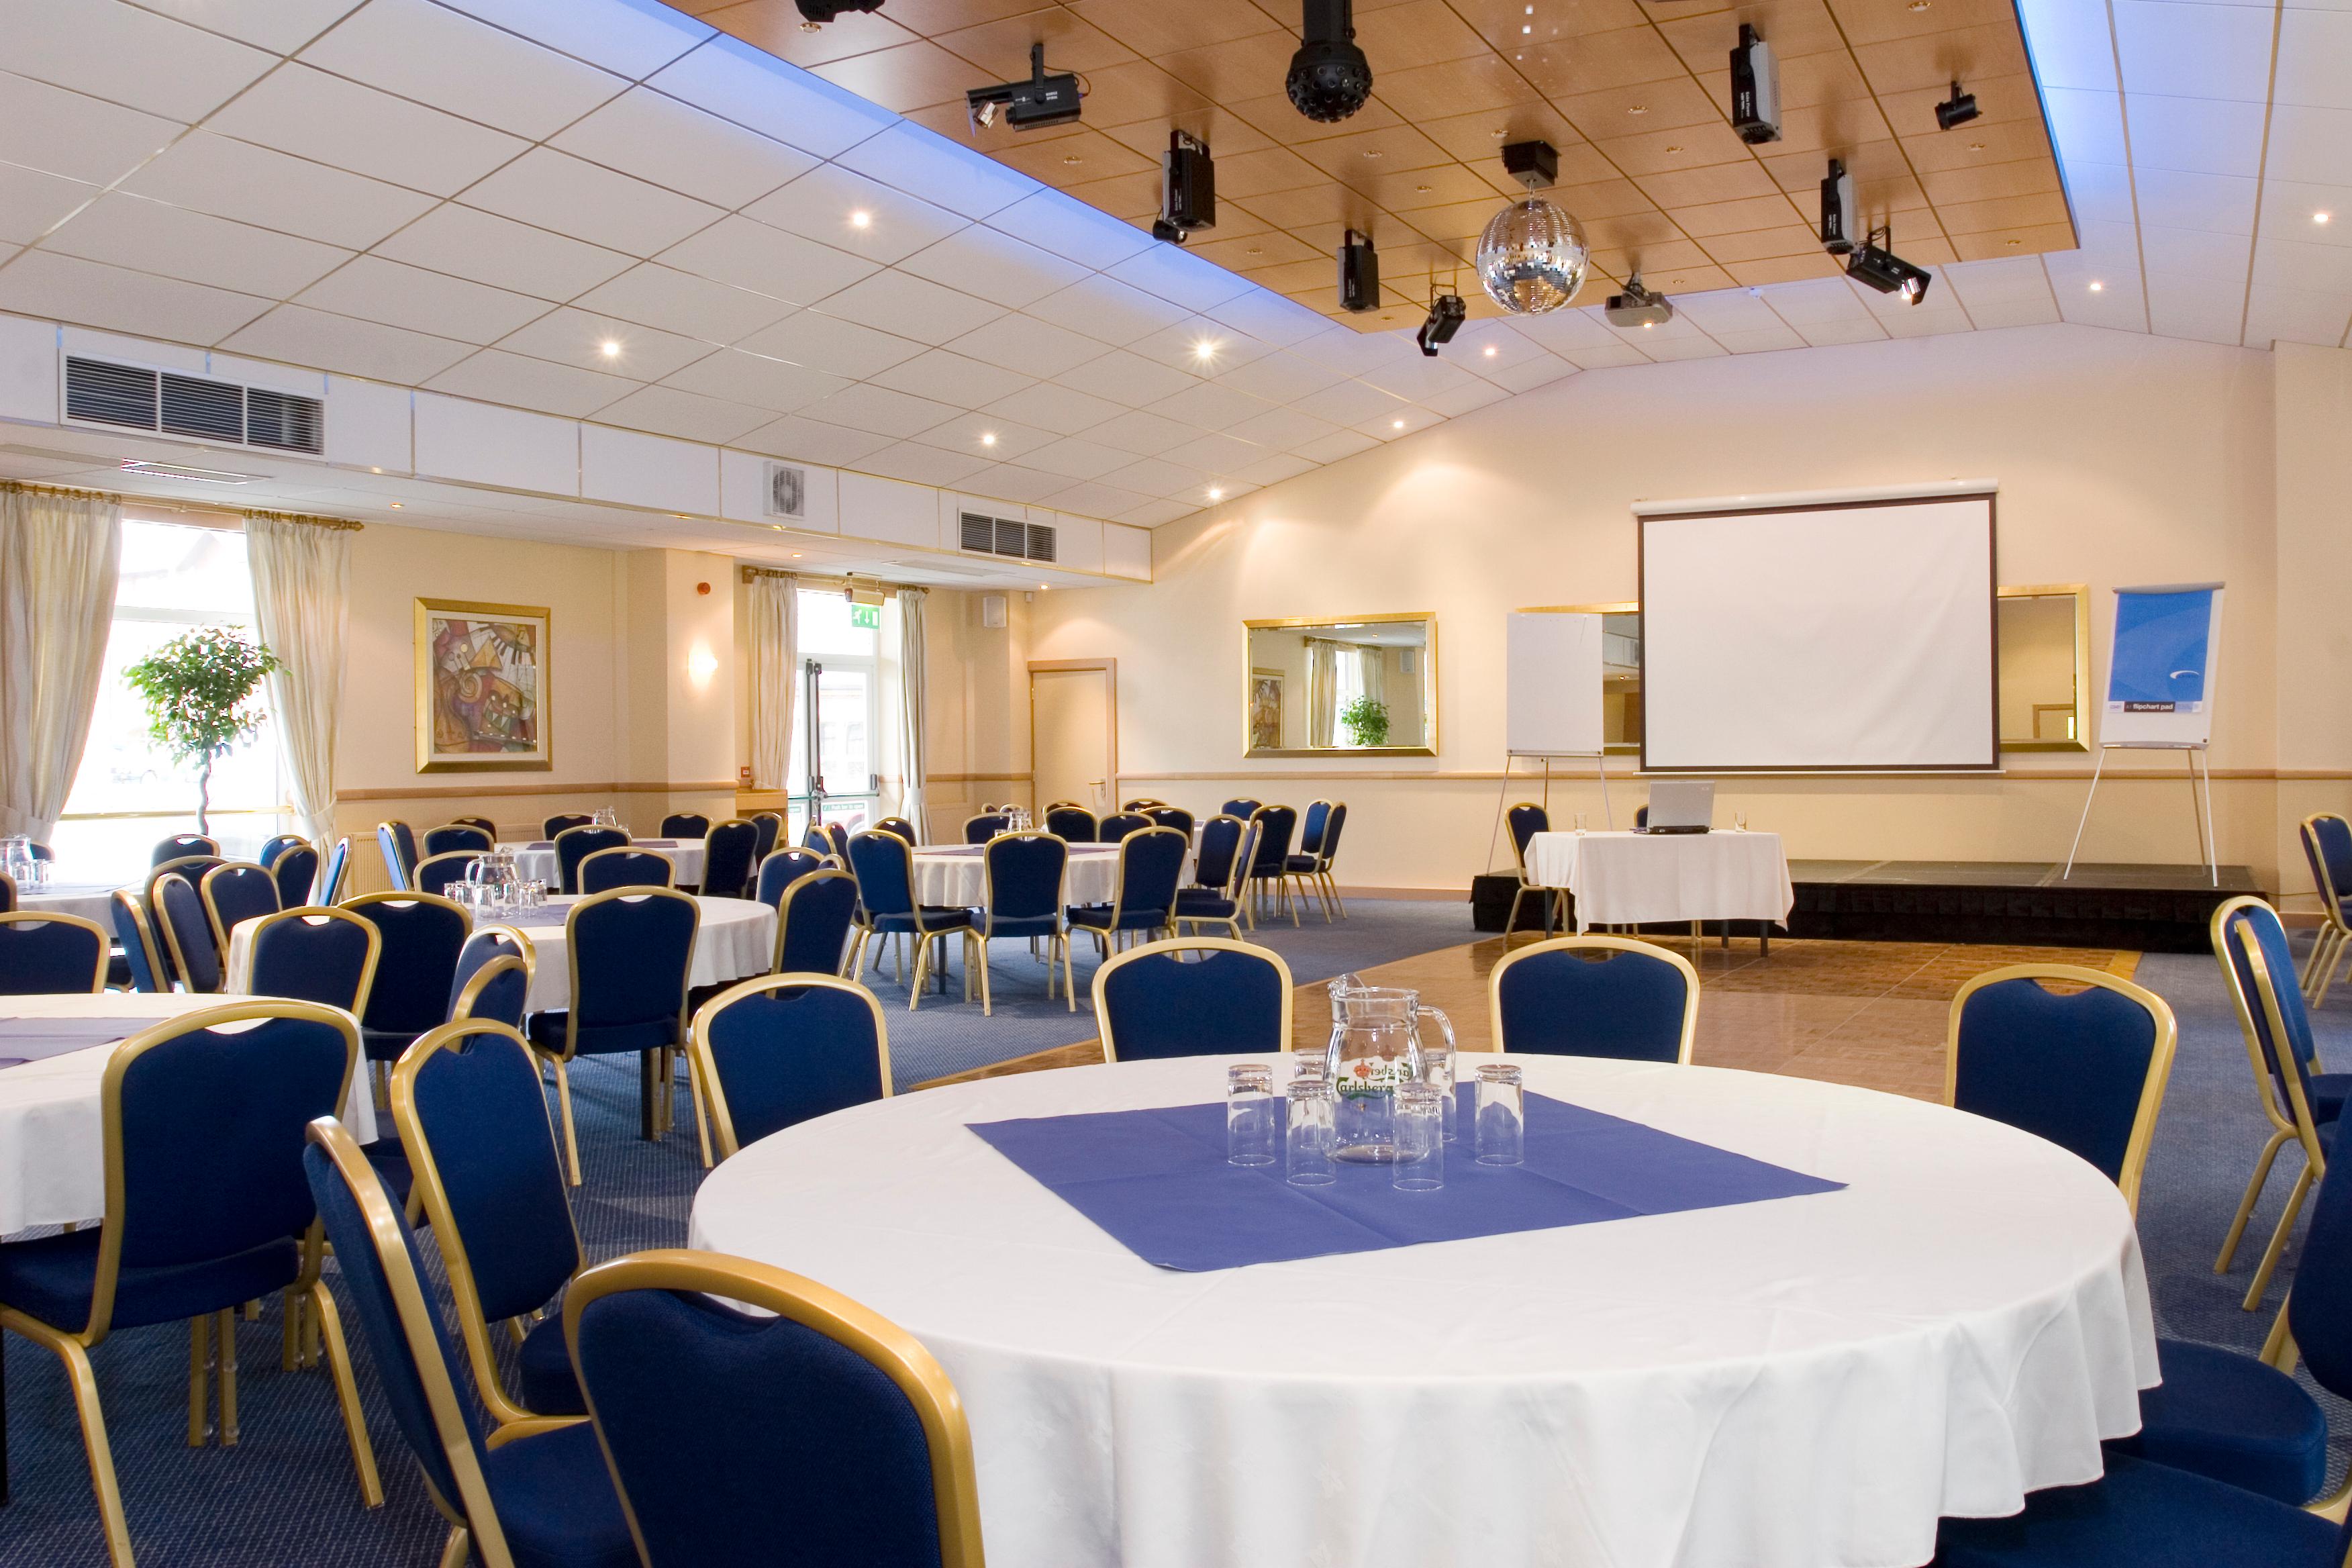 Bluebell Banqueting Suite, The Fairway And Bluebell Banqueting Suite photo #7